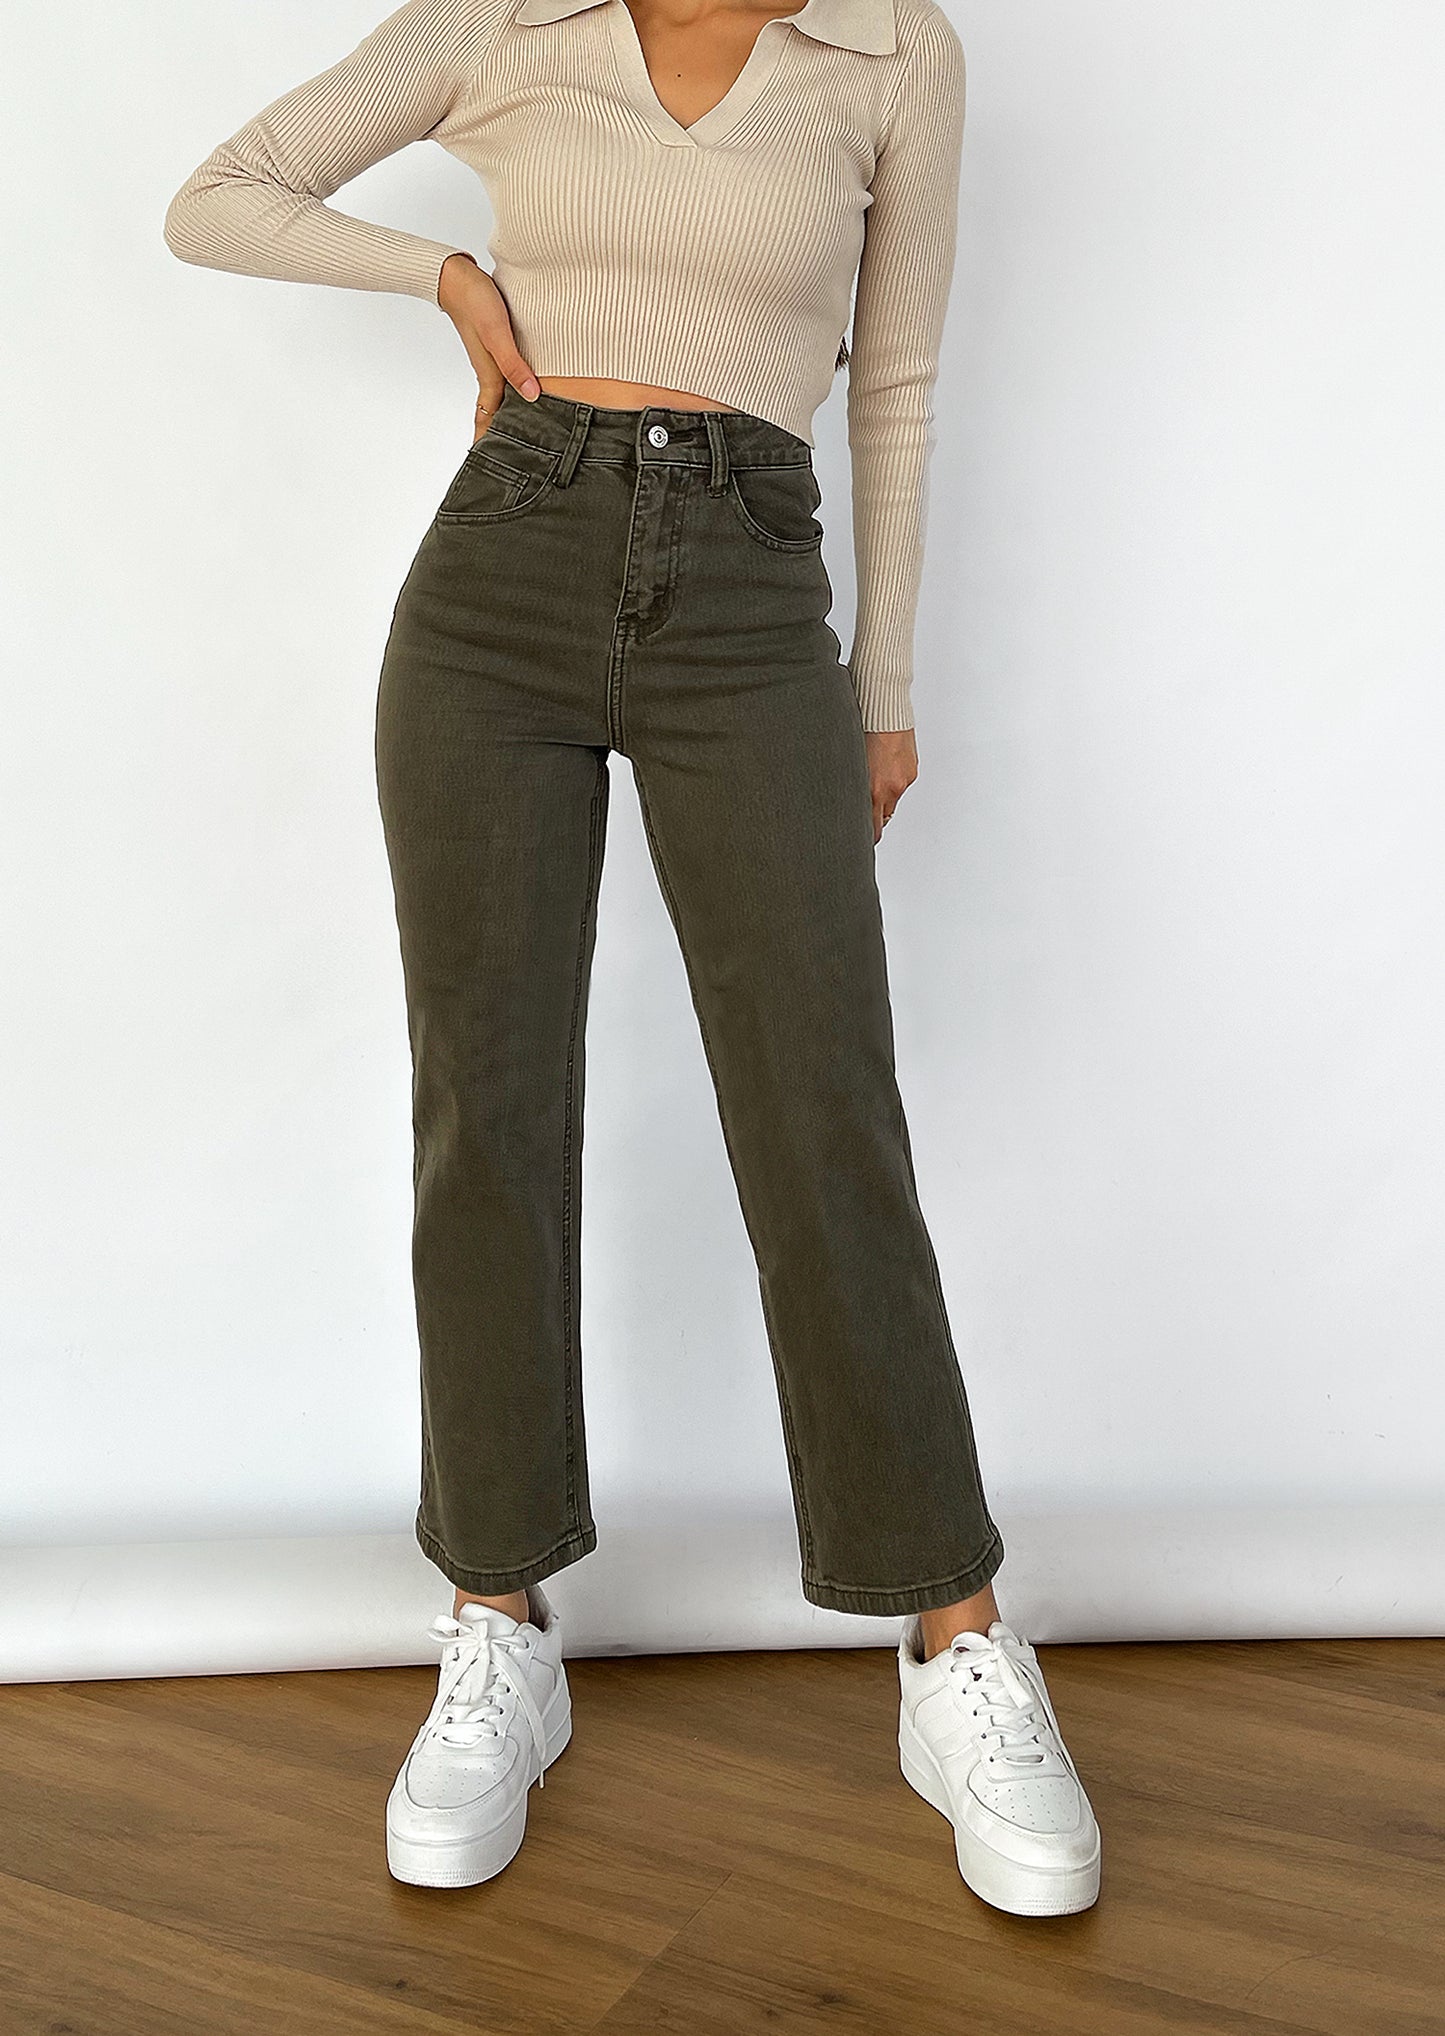 Dad jeans in khaki